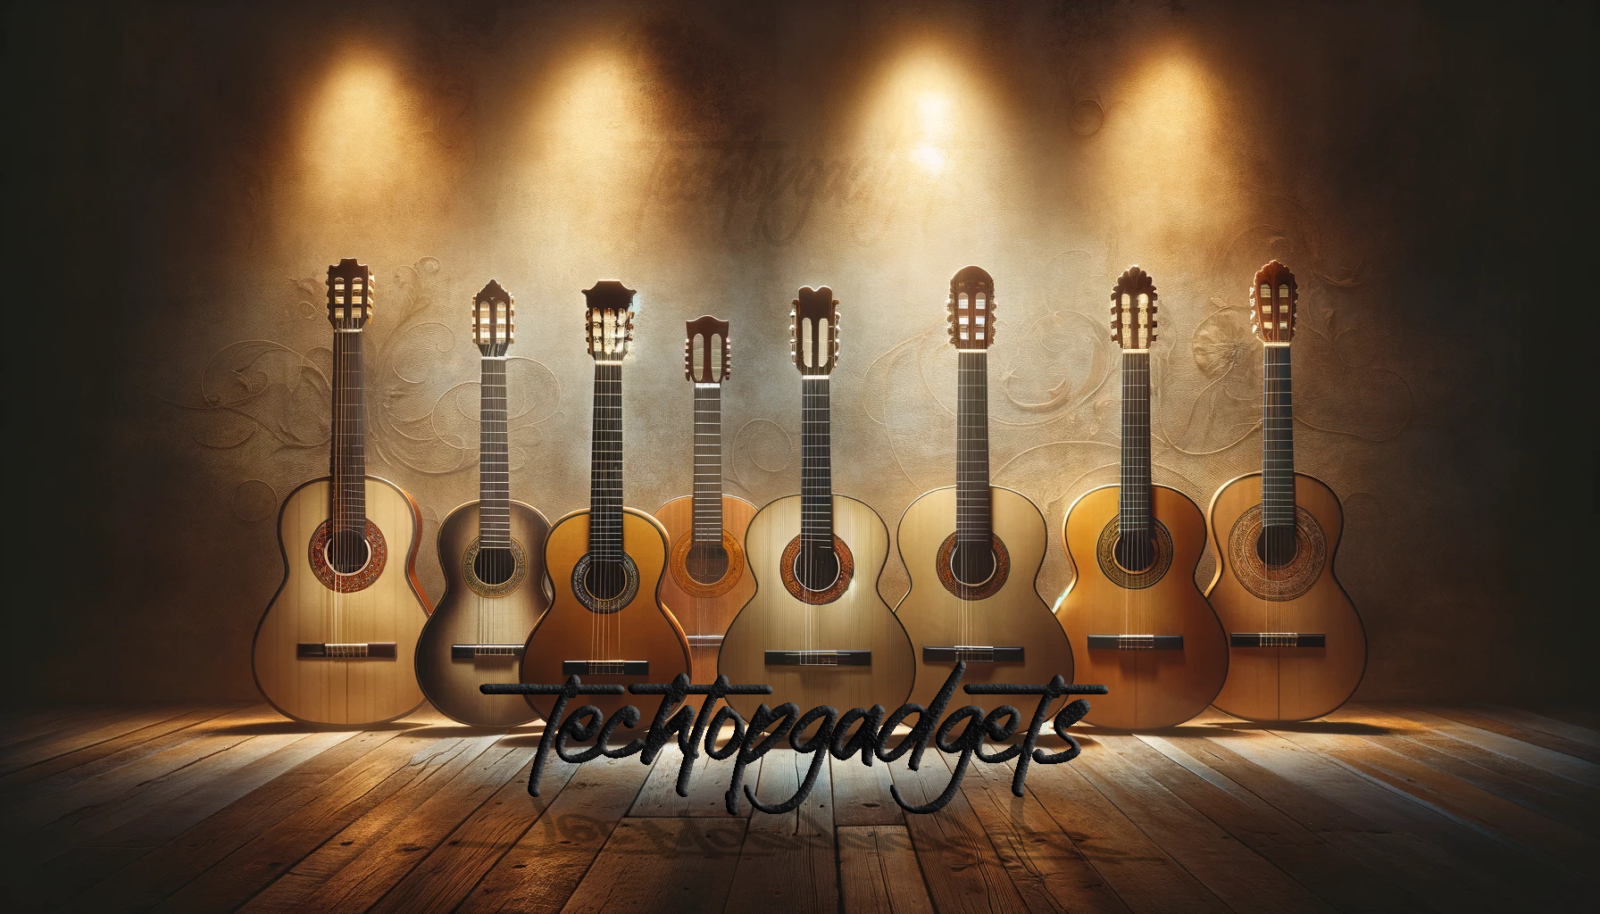 This collection showcases some of the best classical guitars for beginners, each chosen for its playability, sound, and craftsmanship, ideal for starting your musical journey.